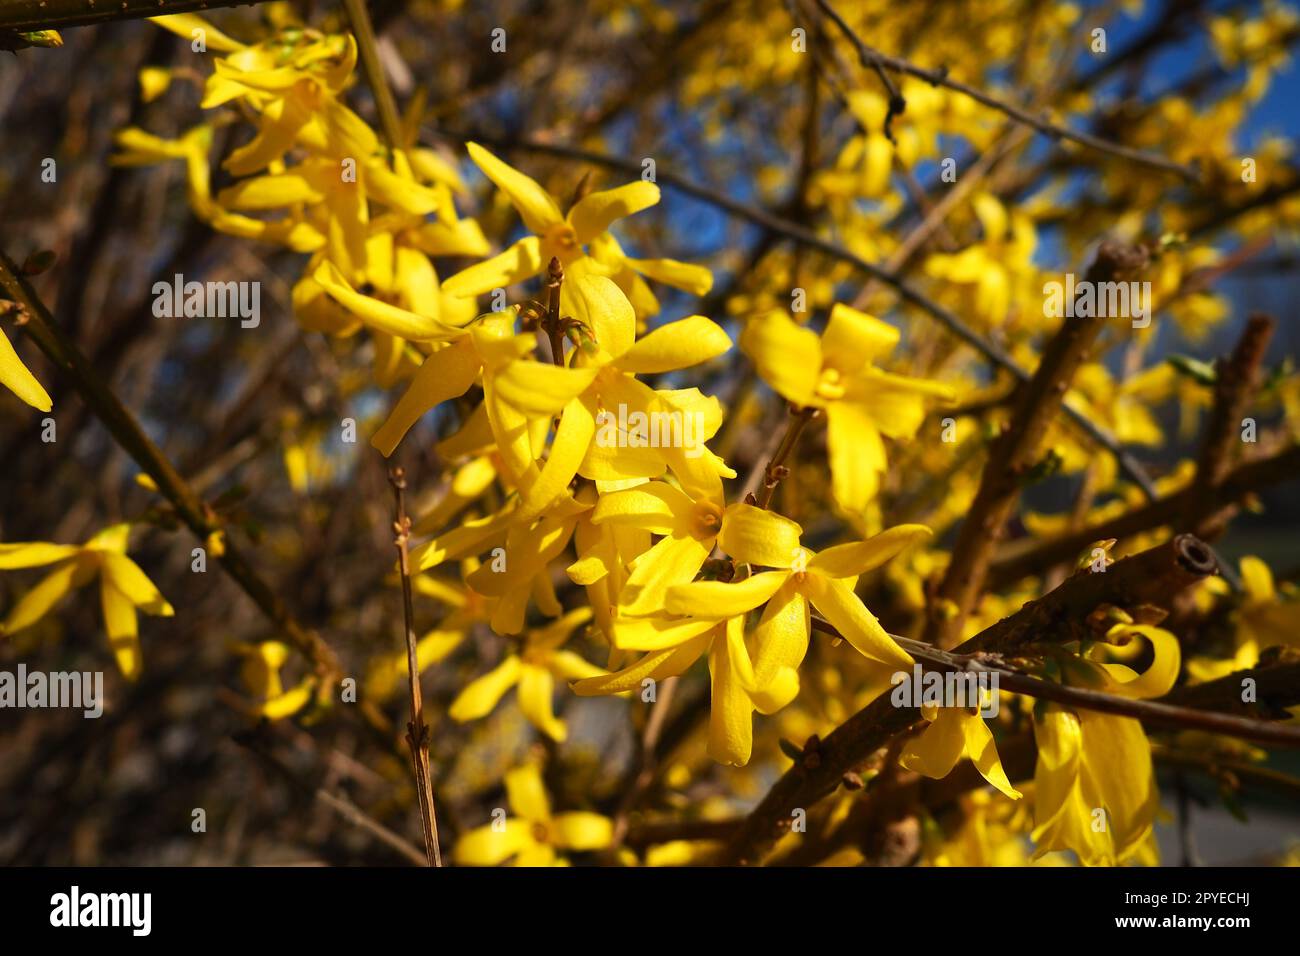 Forsythia is a genus of shrubs and small trees of the Olive family. Numerous yellow flowers on branches and shoots. Class Dicotyledonous Order Lamiaceae Olive family Genus Forsythia Stock Photo